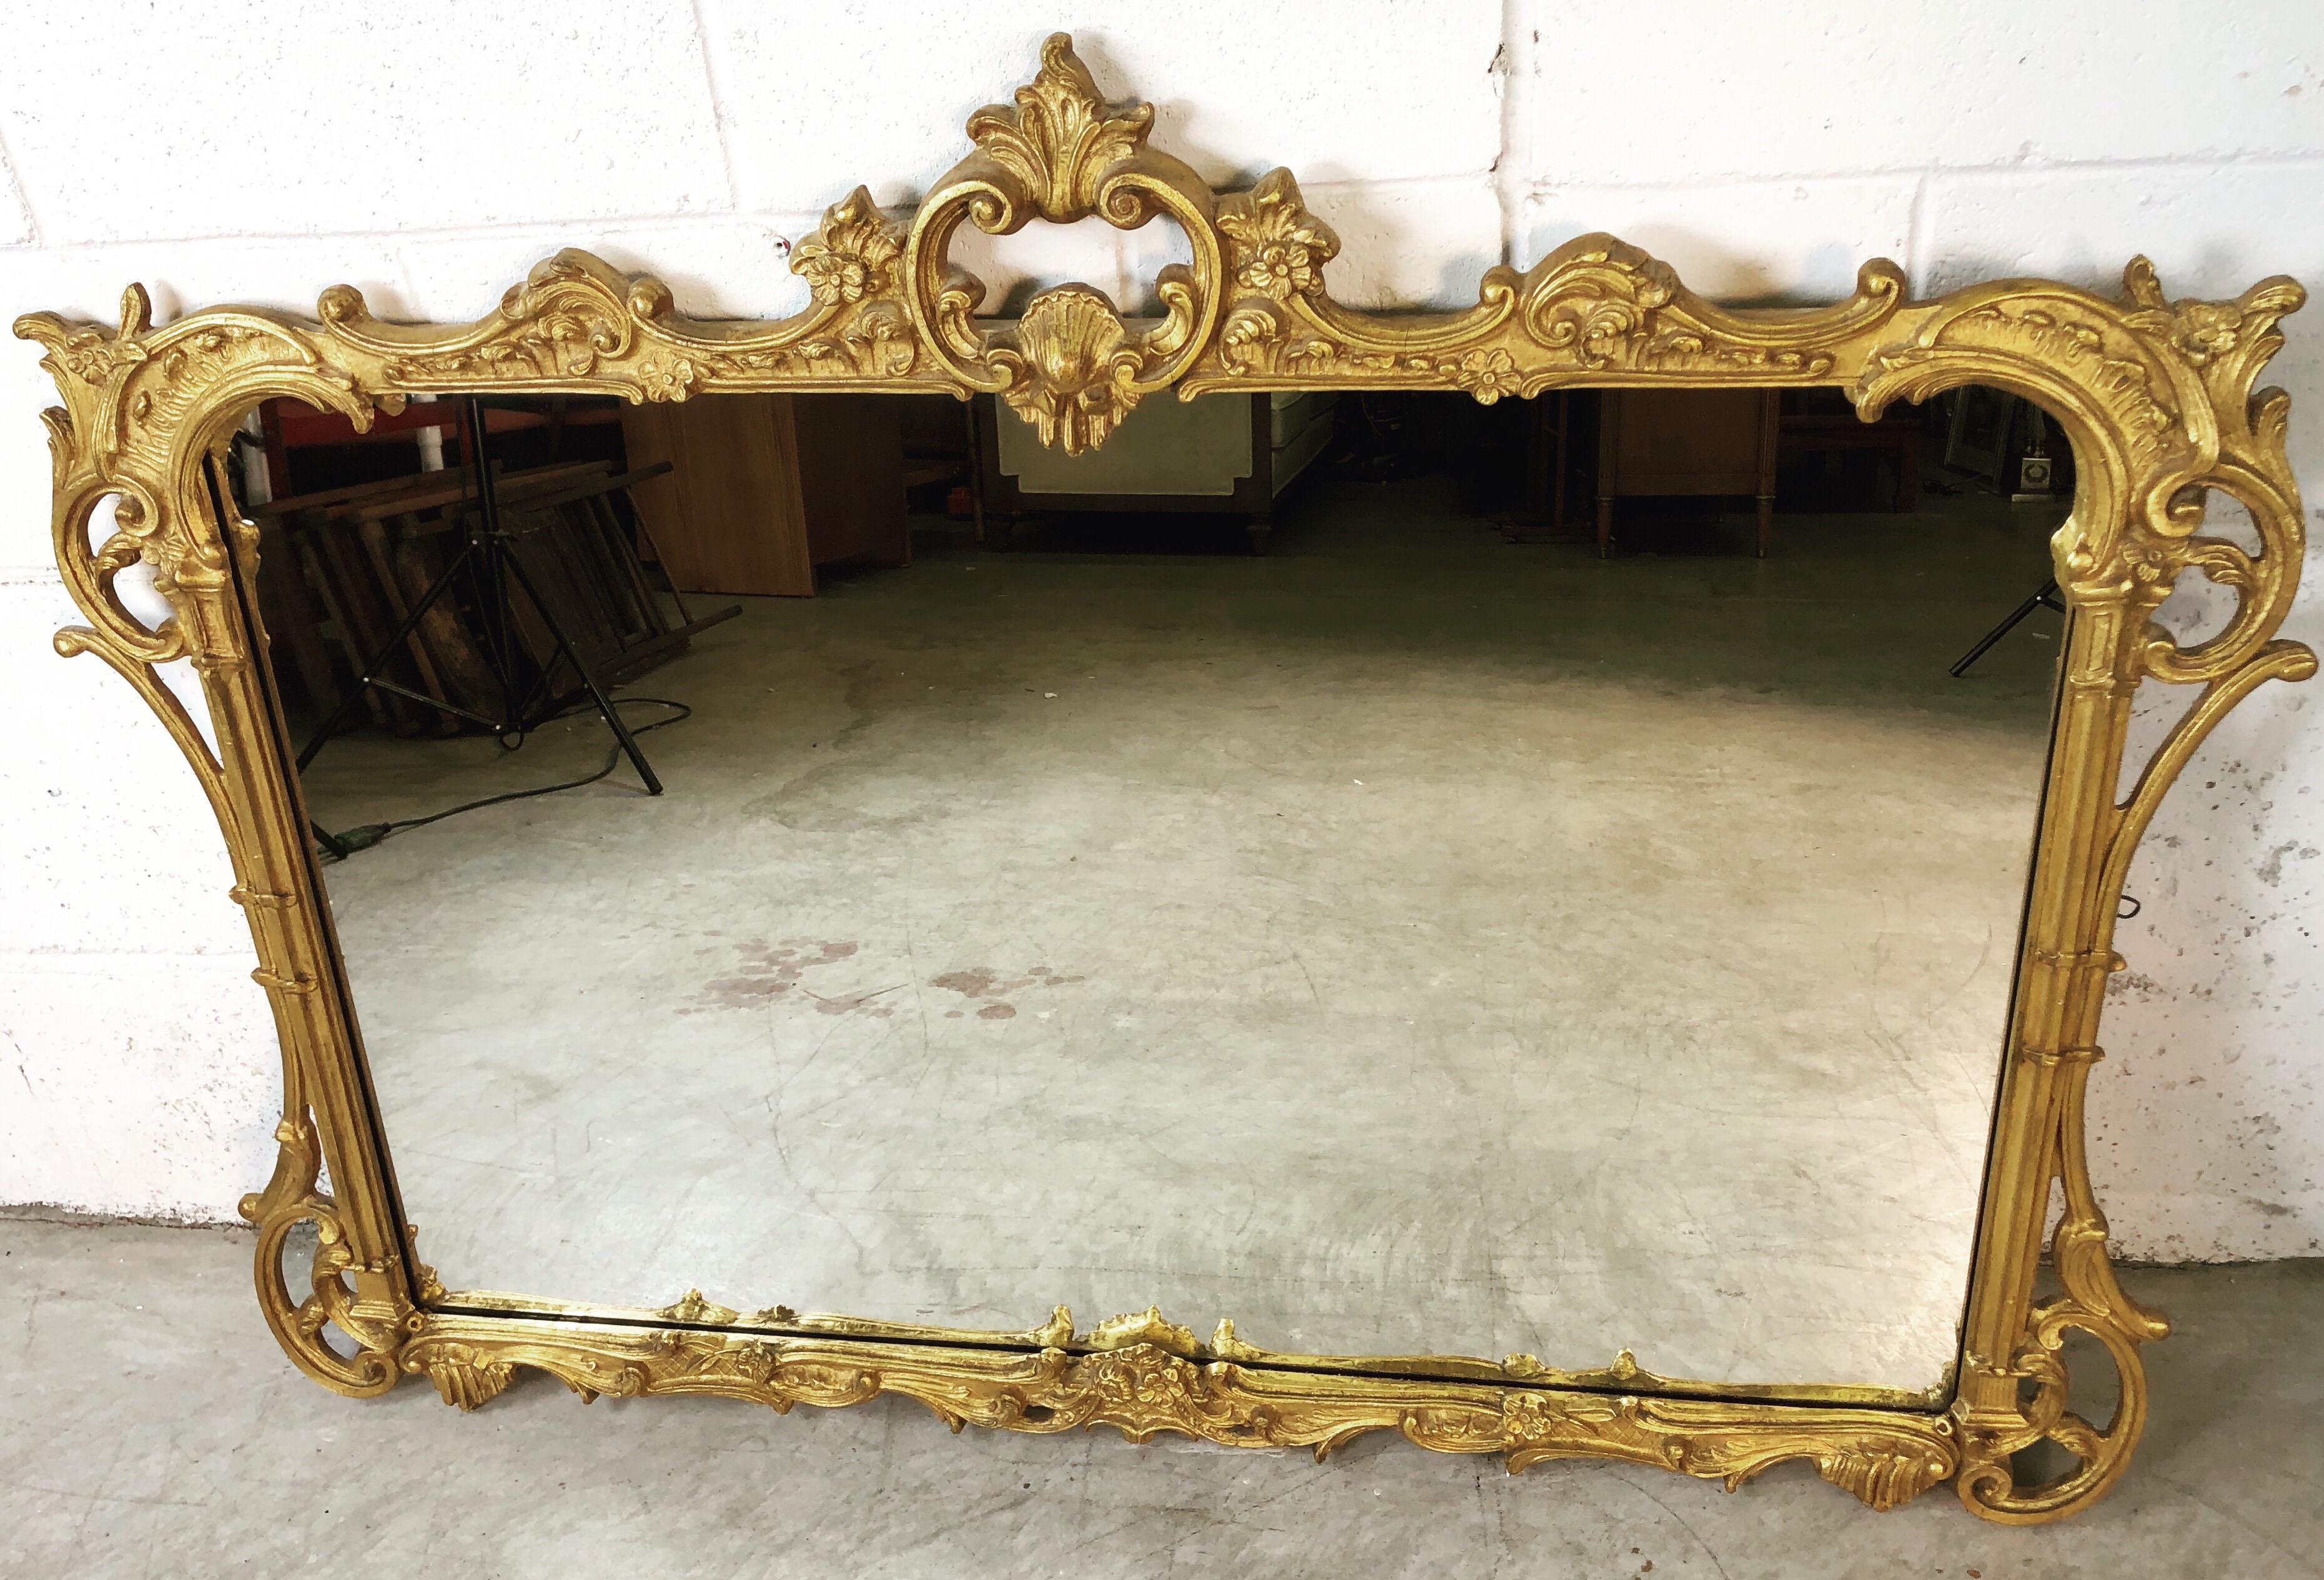 The House of Dinsmore mirror designed by the Friedman Brothers Decorative Arts Co of New York. Beautifully hand carved and gilded wall mirror. Excellent condition. Marked on the back. Some hardware is included.